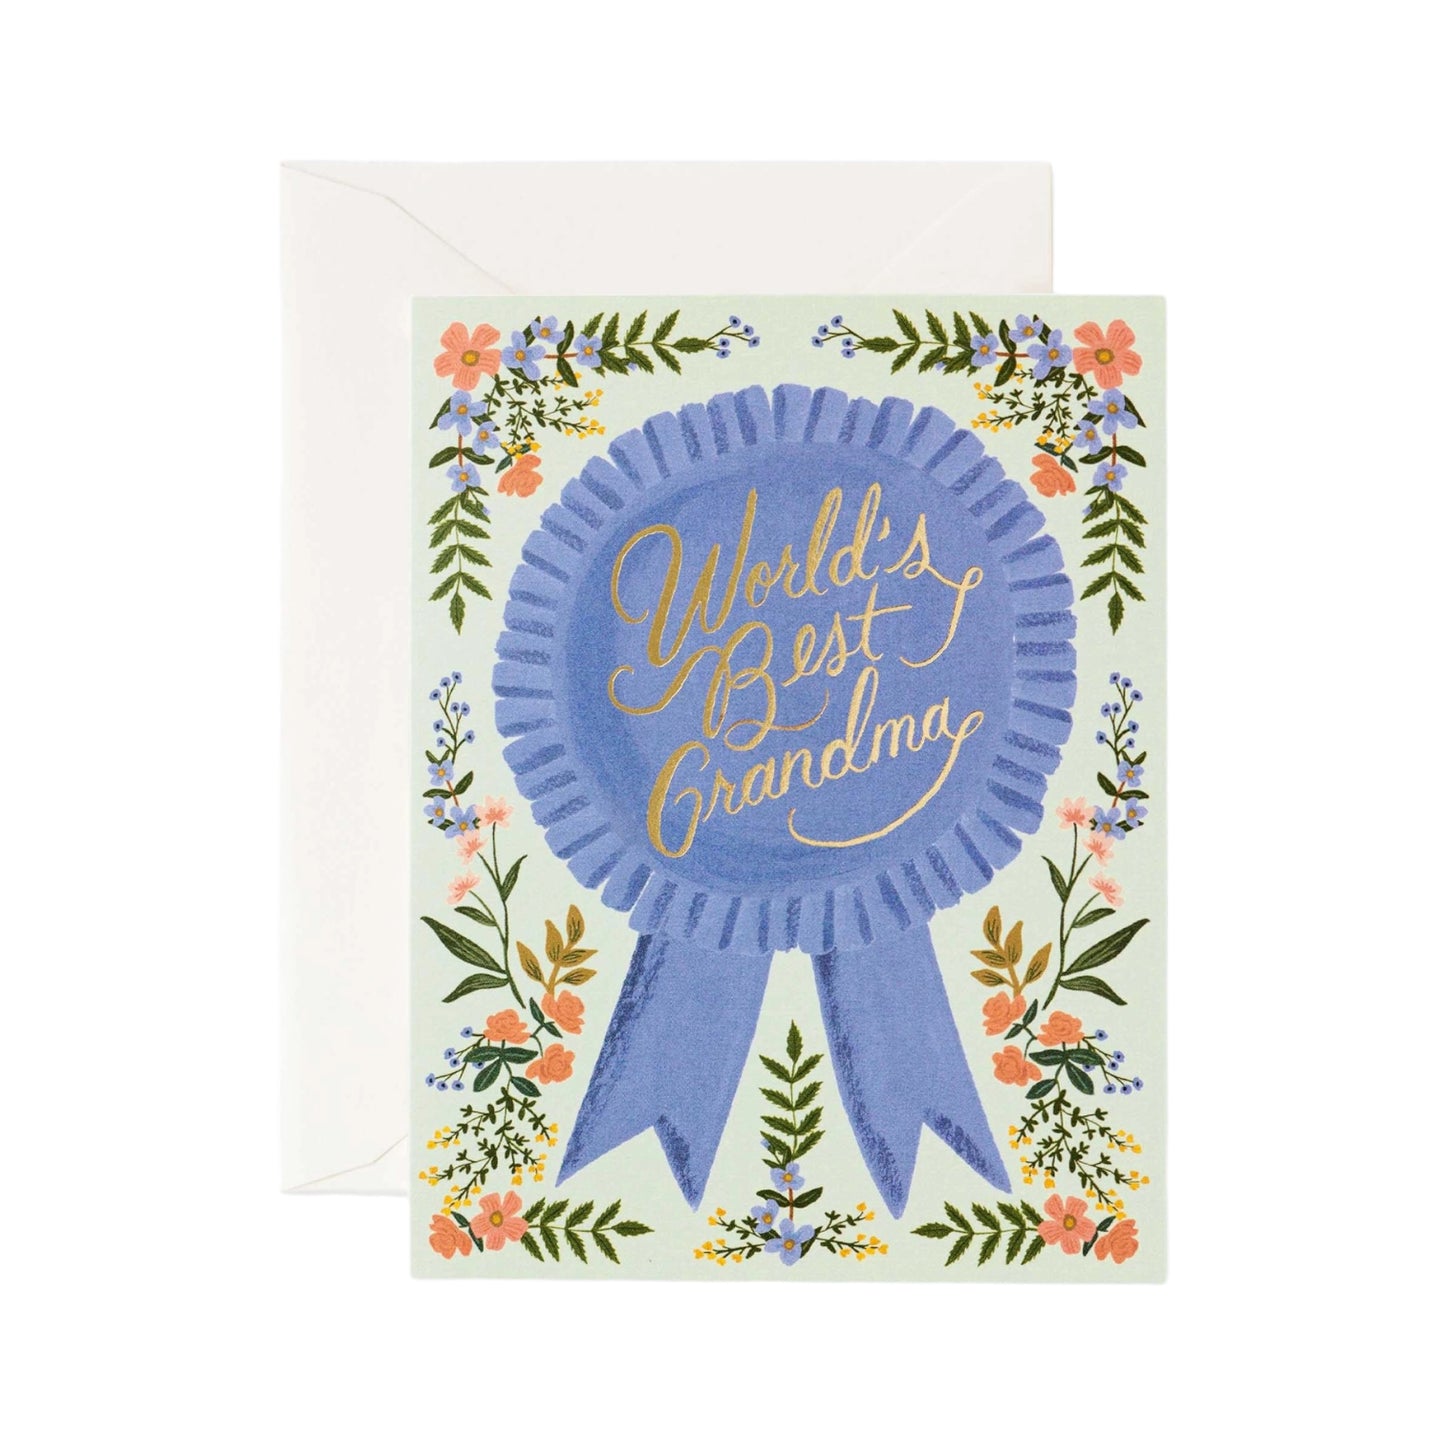 World's Best Grandma Card by Rifle Paper Co.